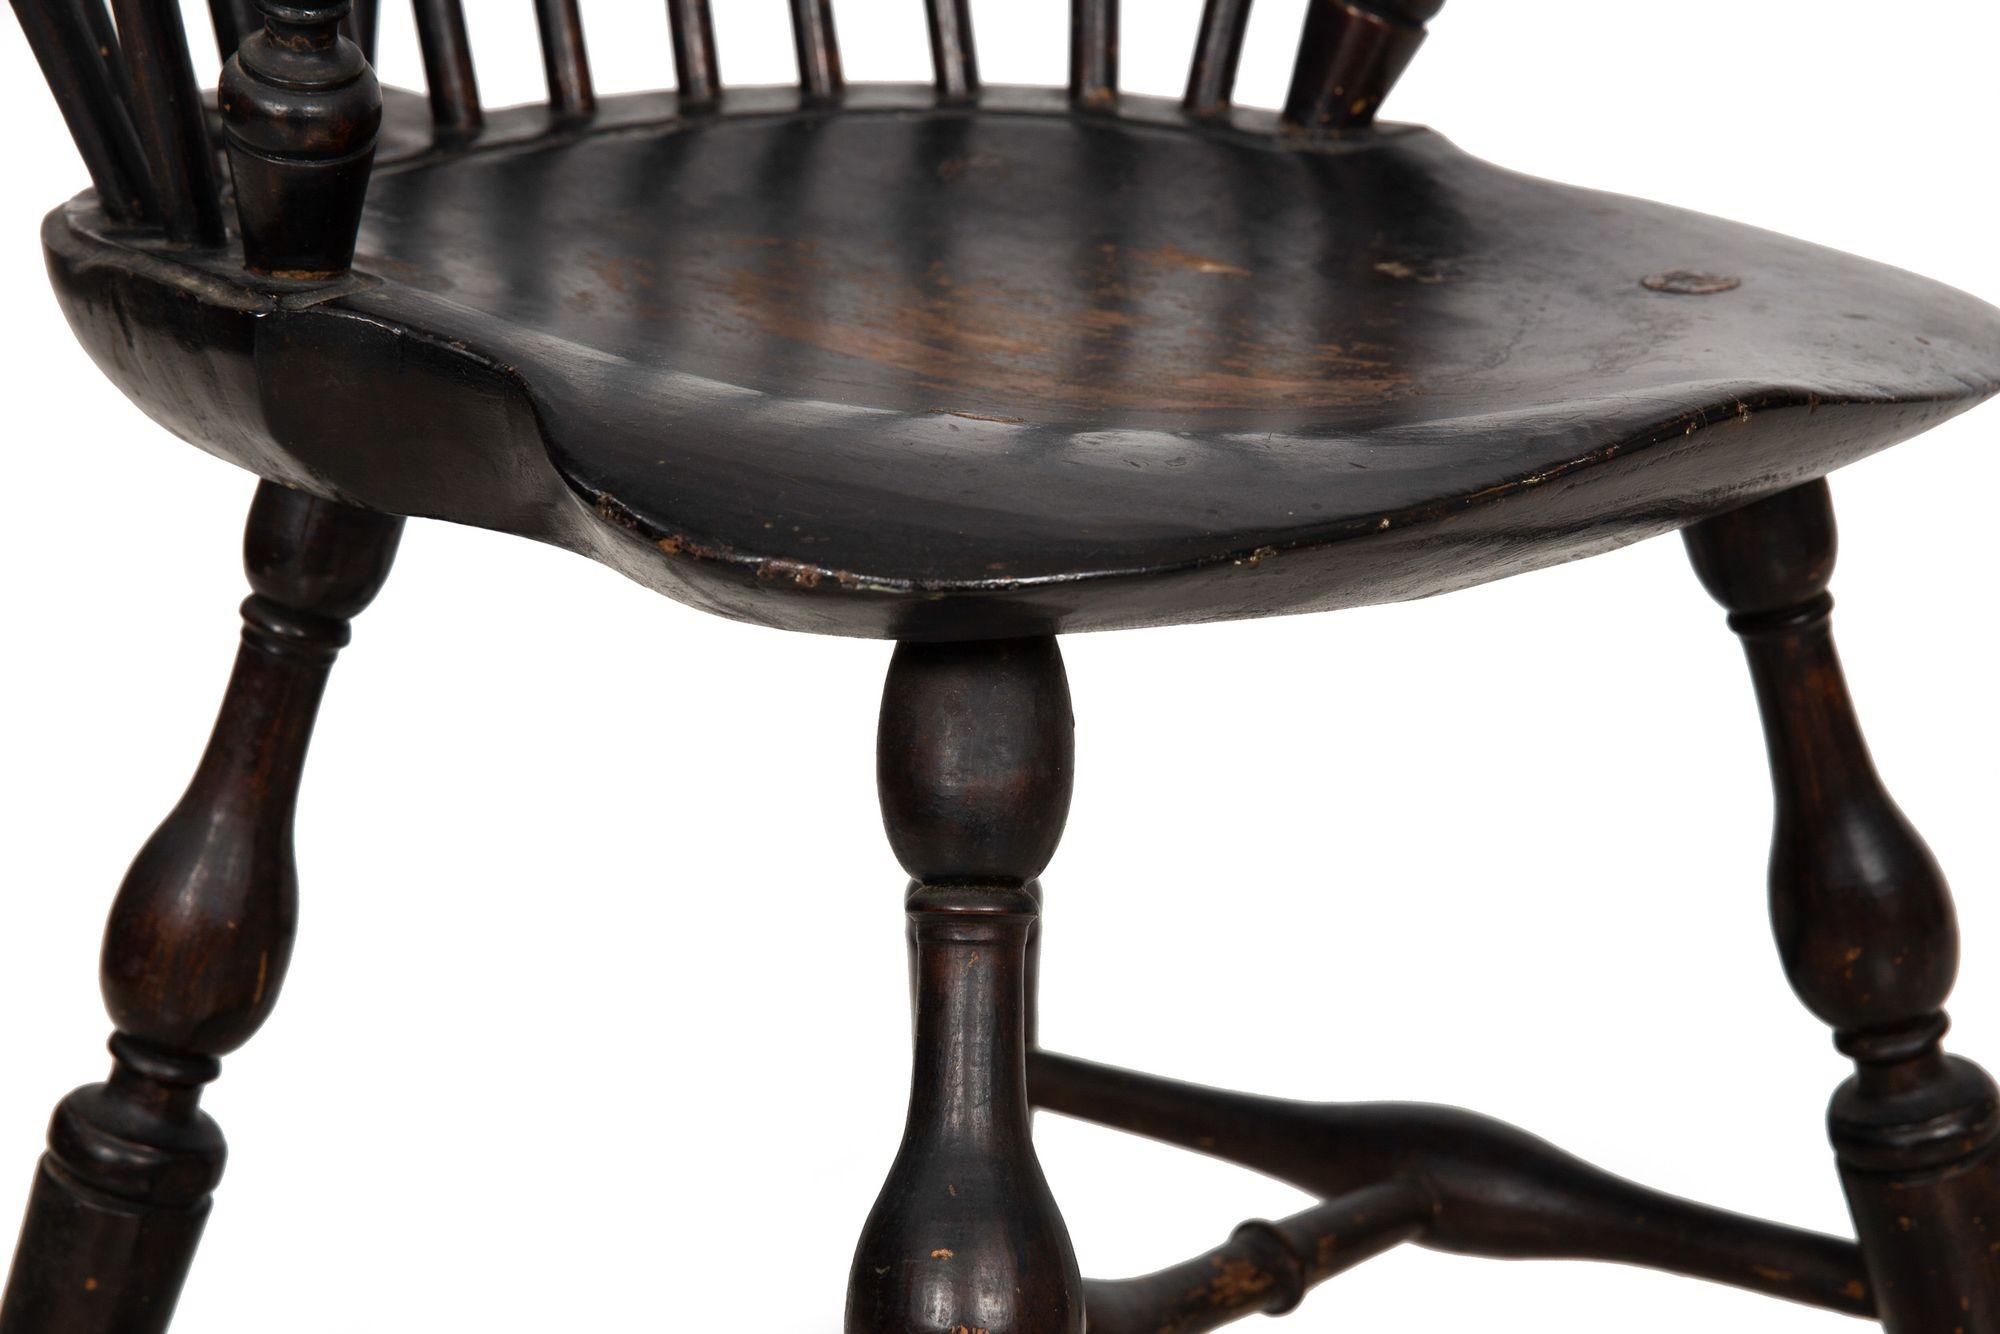 Rare American Brace-Back Continuous Arm Windsor Chair, New York ca. 1790 8